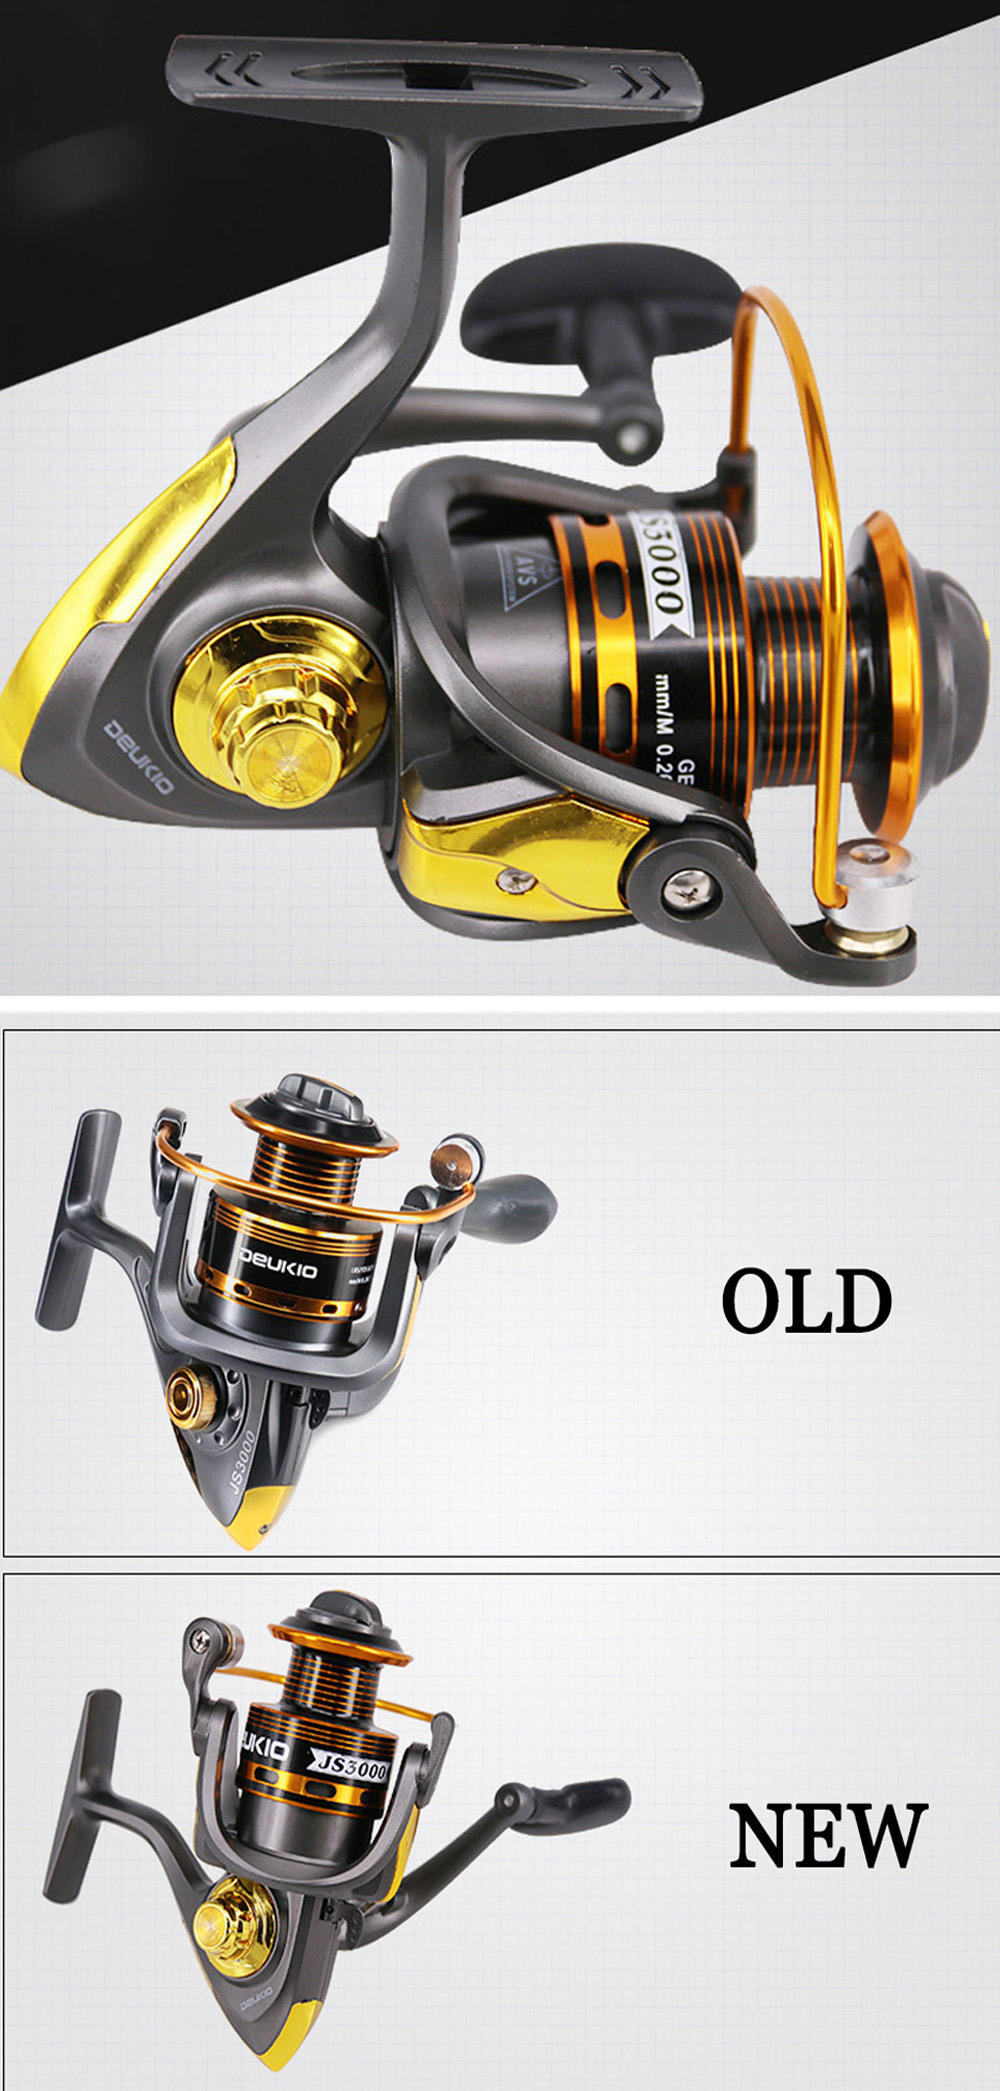 DEUKIO-521-Speed-Braking-Force-Fish-Reel-Spinning-Wheel-Aluminum-Alloy-Can-Be-Folded-Left-And-Right--1842489-1